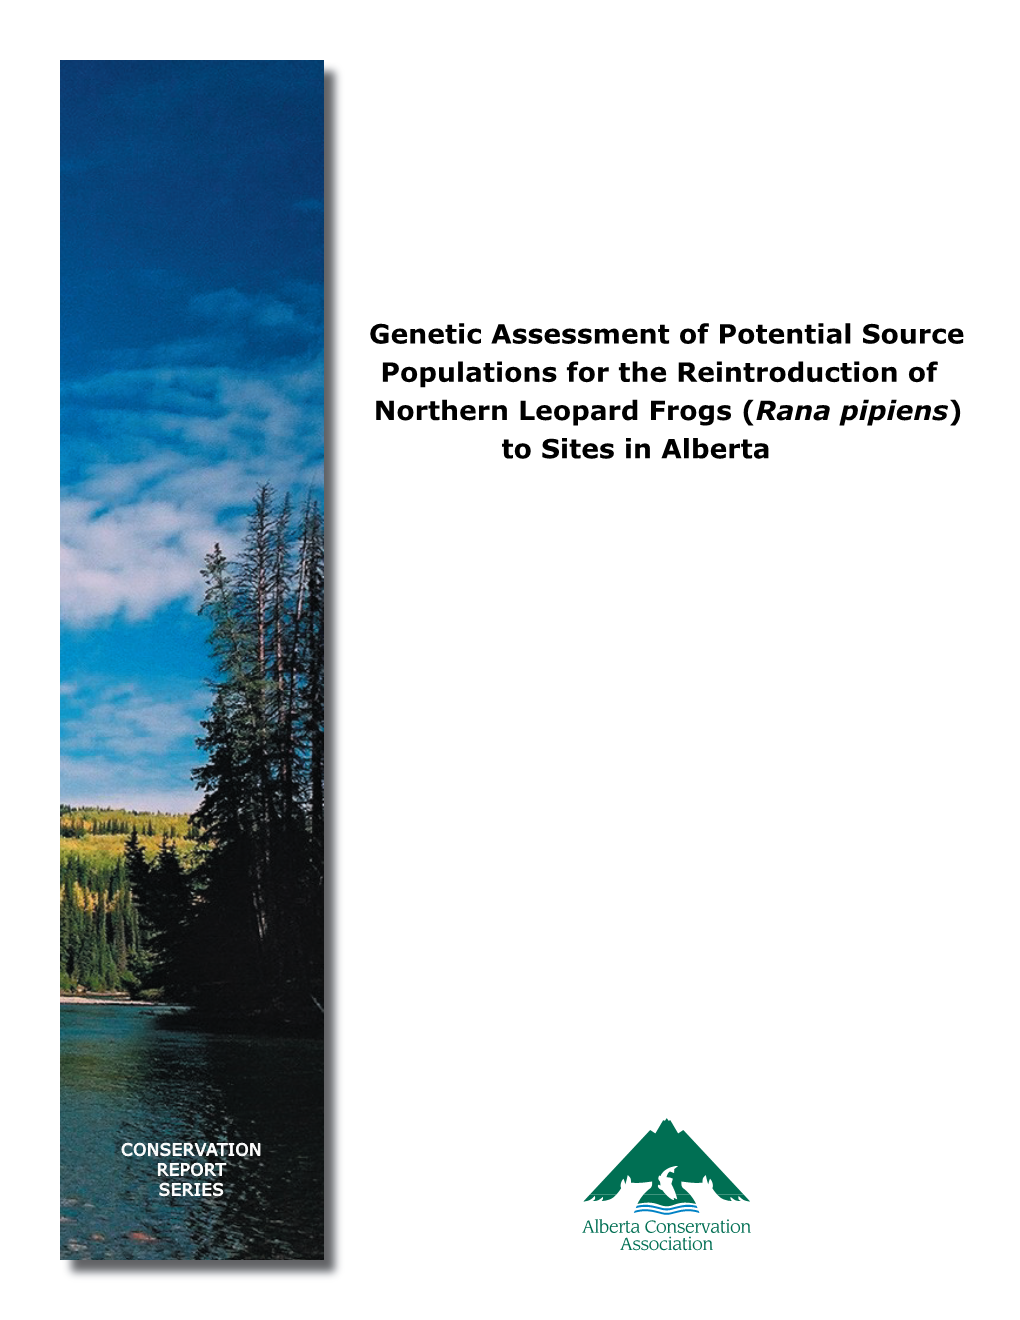 Genetic Assessment of Potential Source Populations for the Reintroduction of Northern Leopard Frogs (Rana Pipiens) to Sites in Alberta